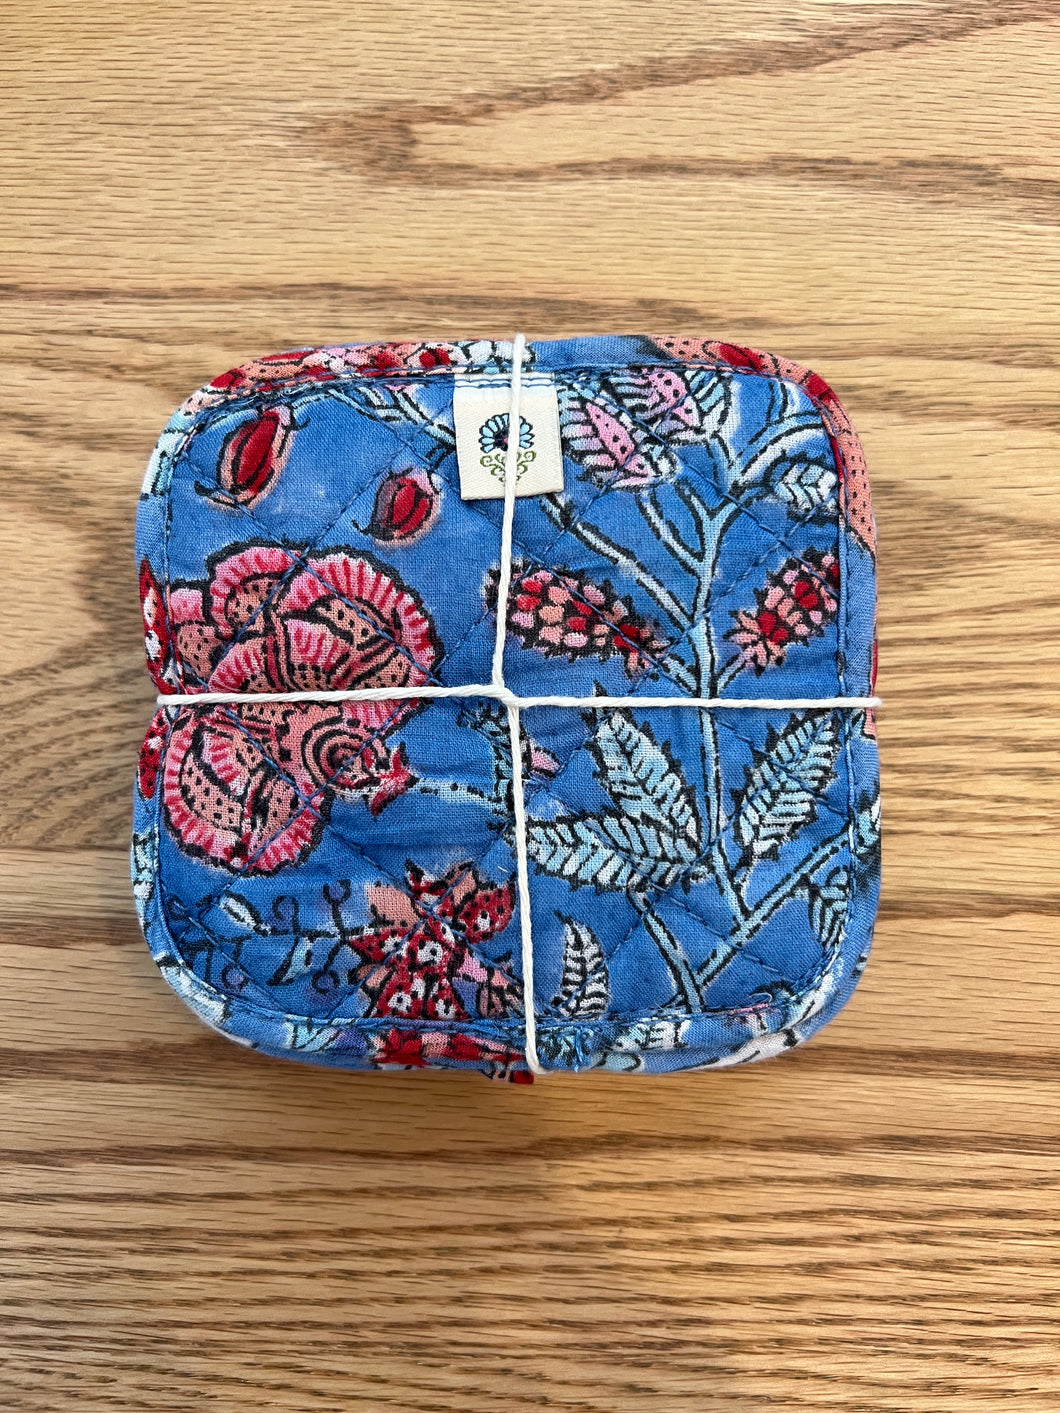 Quilted coasters (set of 6) - blue red floral